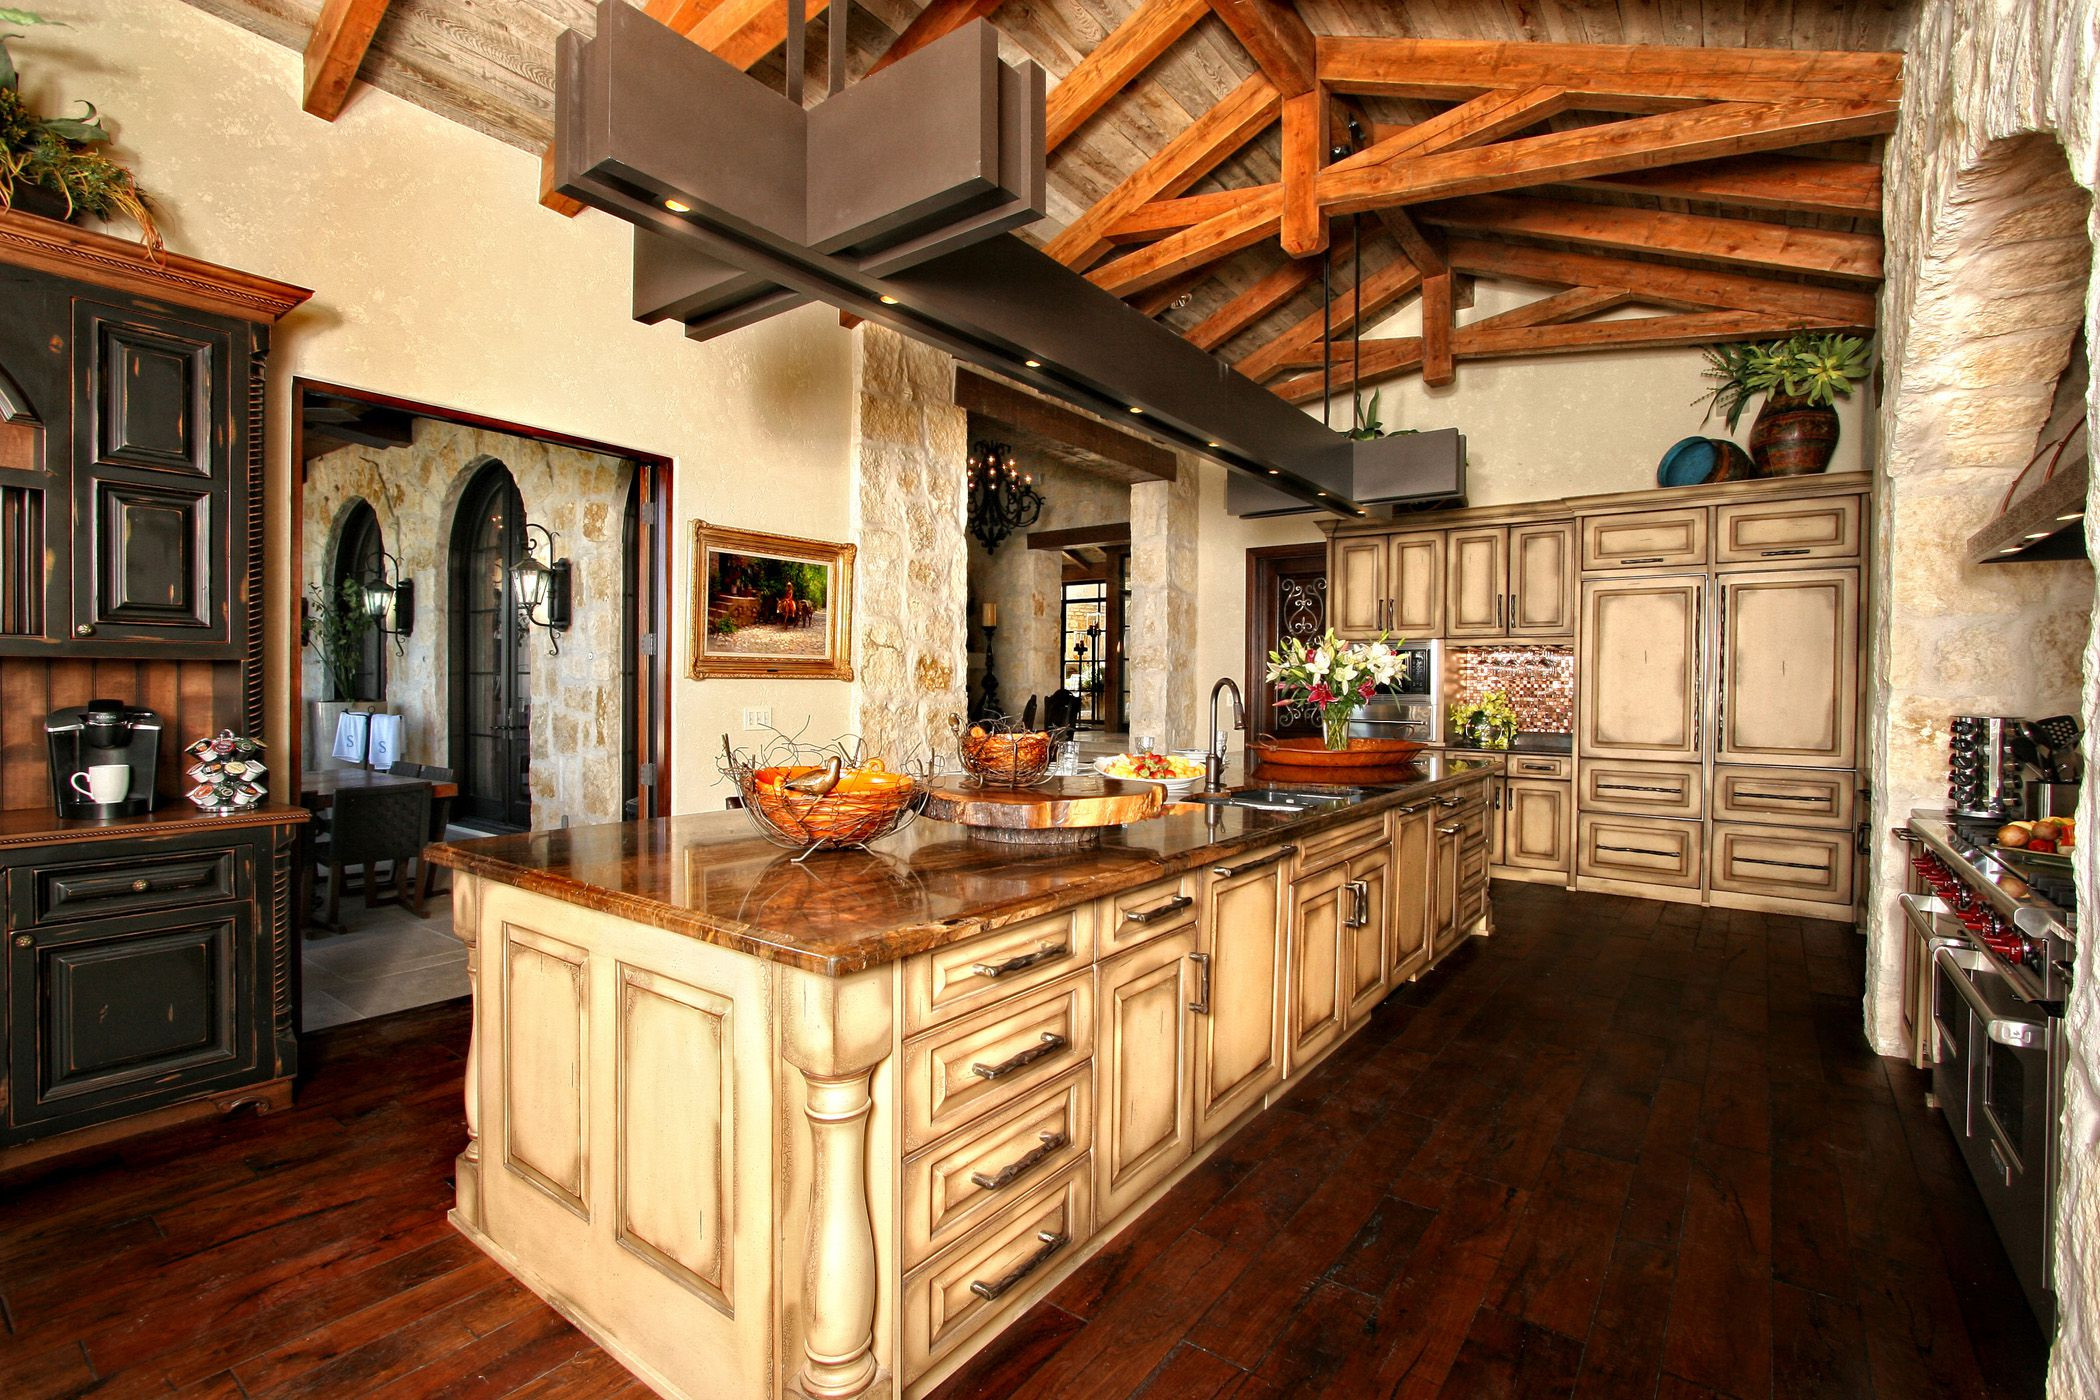 Kitchen Cabinet Rustic
 Charming Rustic Kitchen Ideas and Inspirations Traba Homes